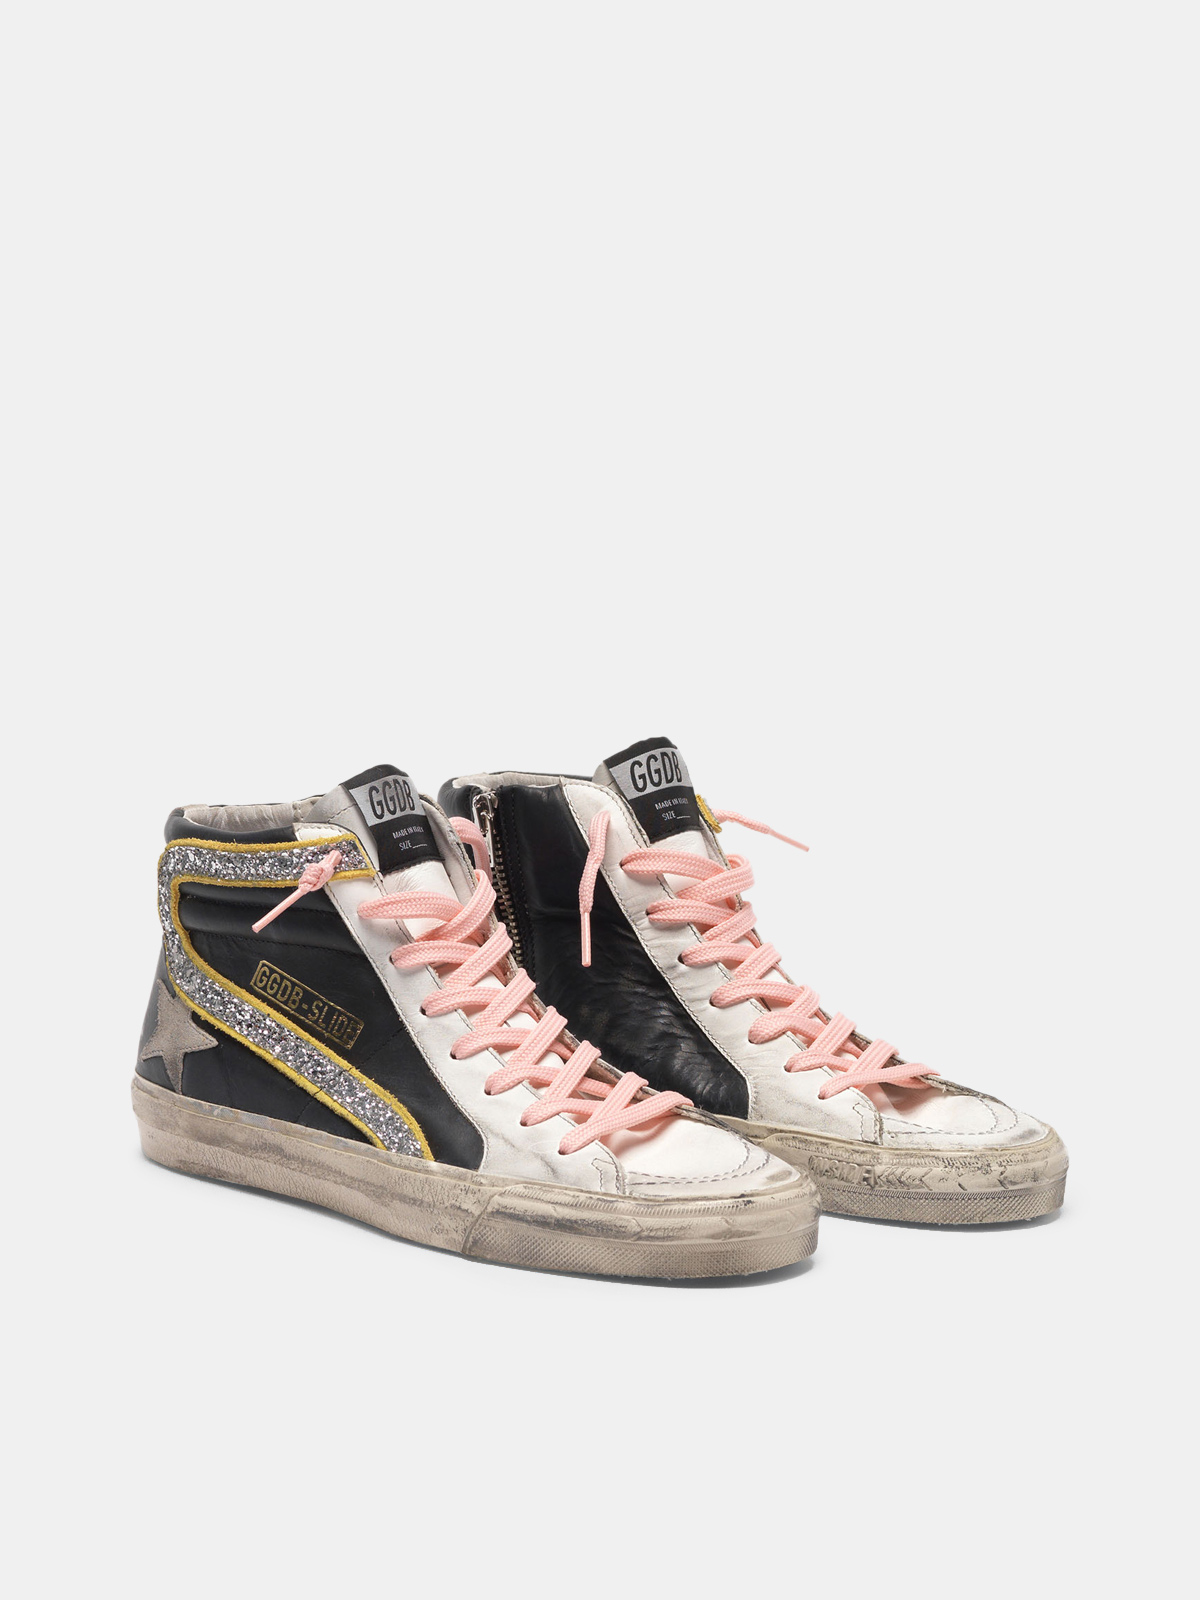 Slide sneakers in two colours with glitter flash and pink laces ...